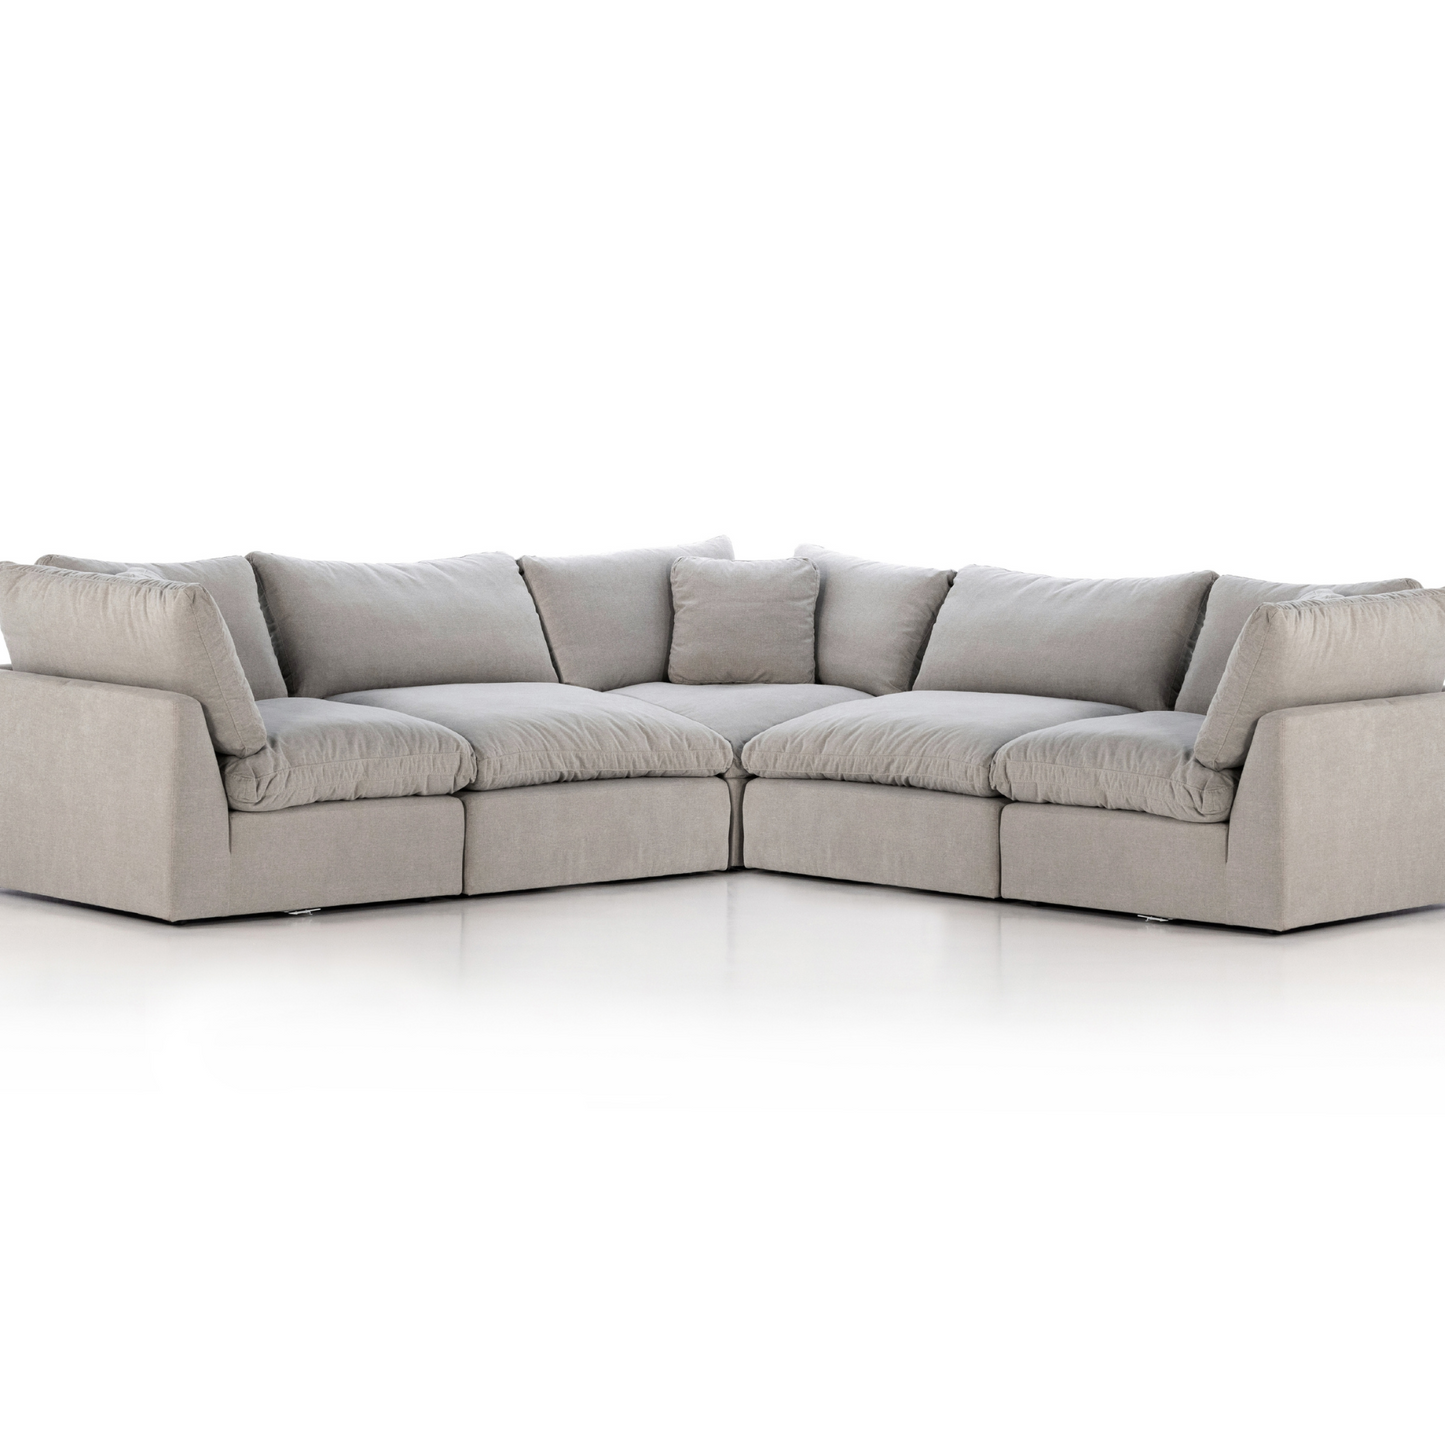 STEVIE 5 PIECE SECTIONAL